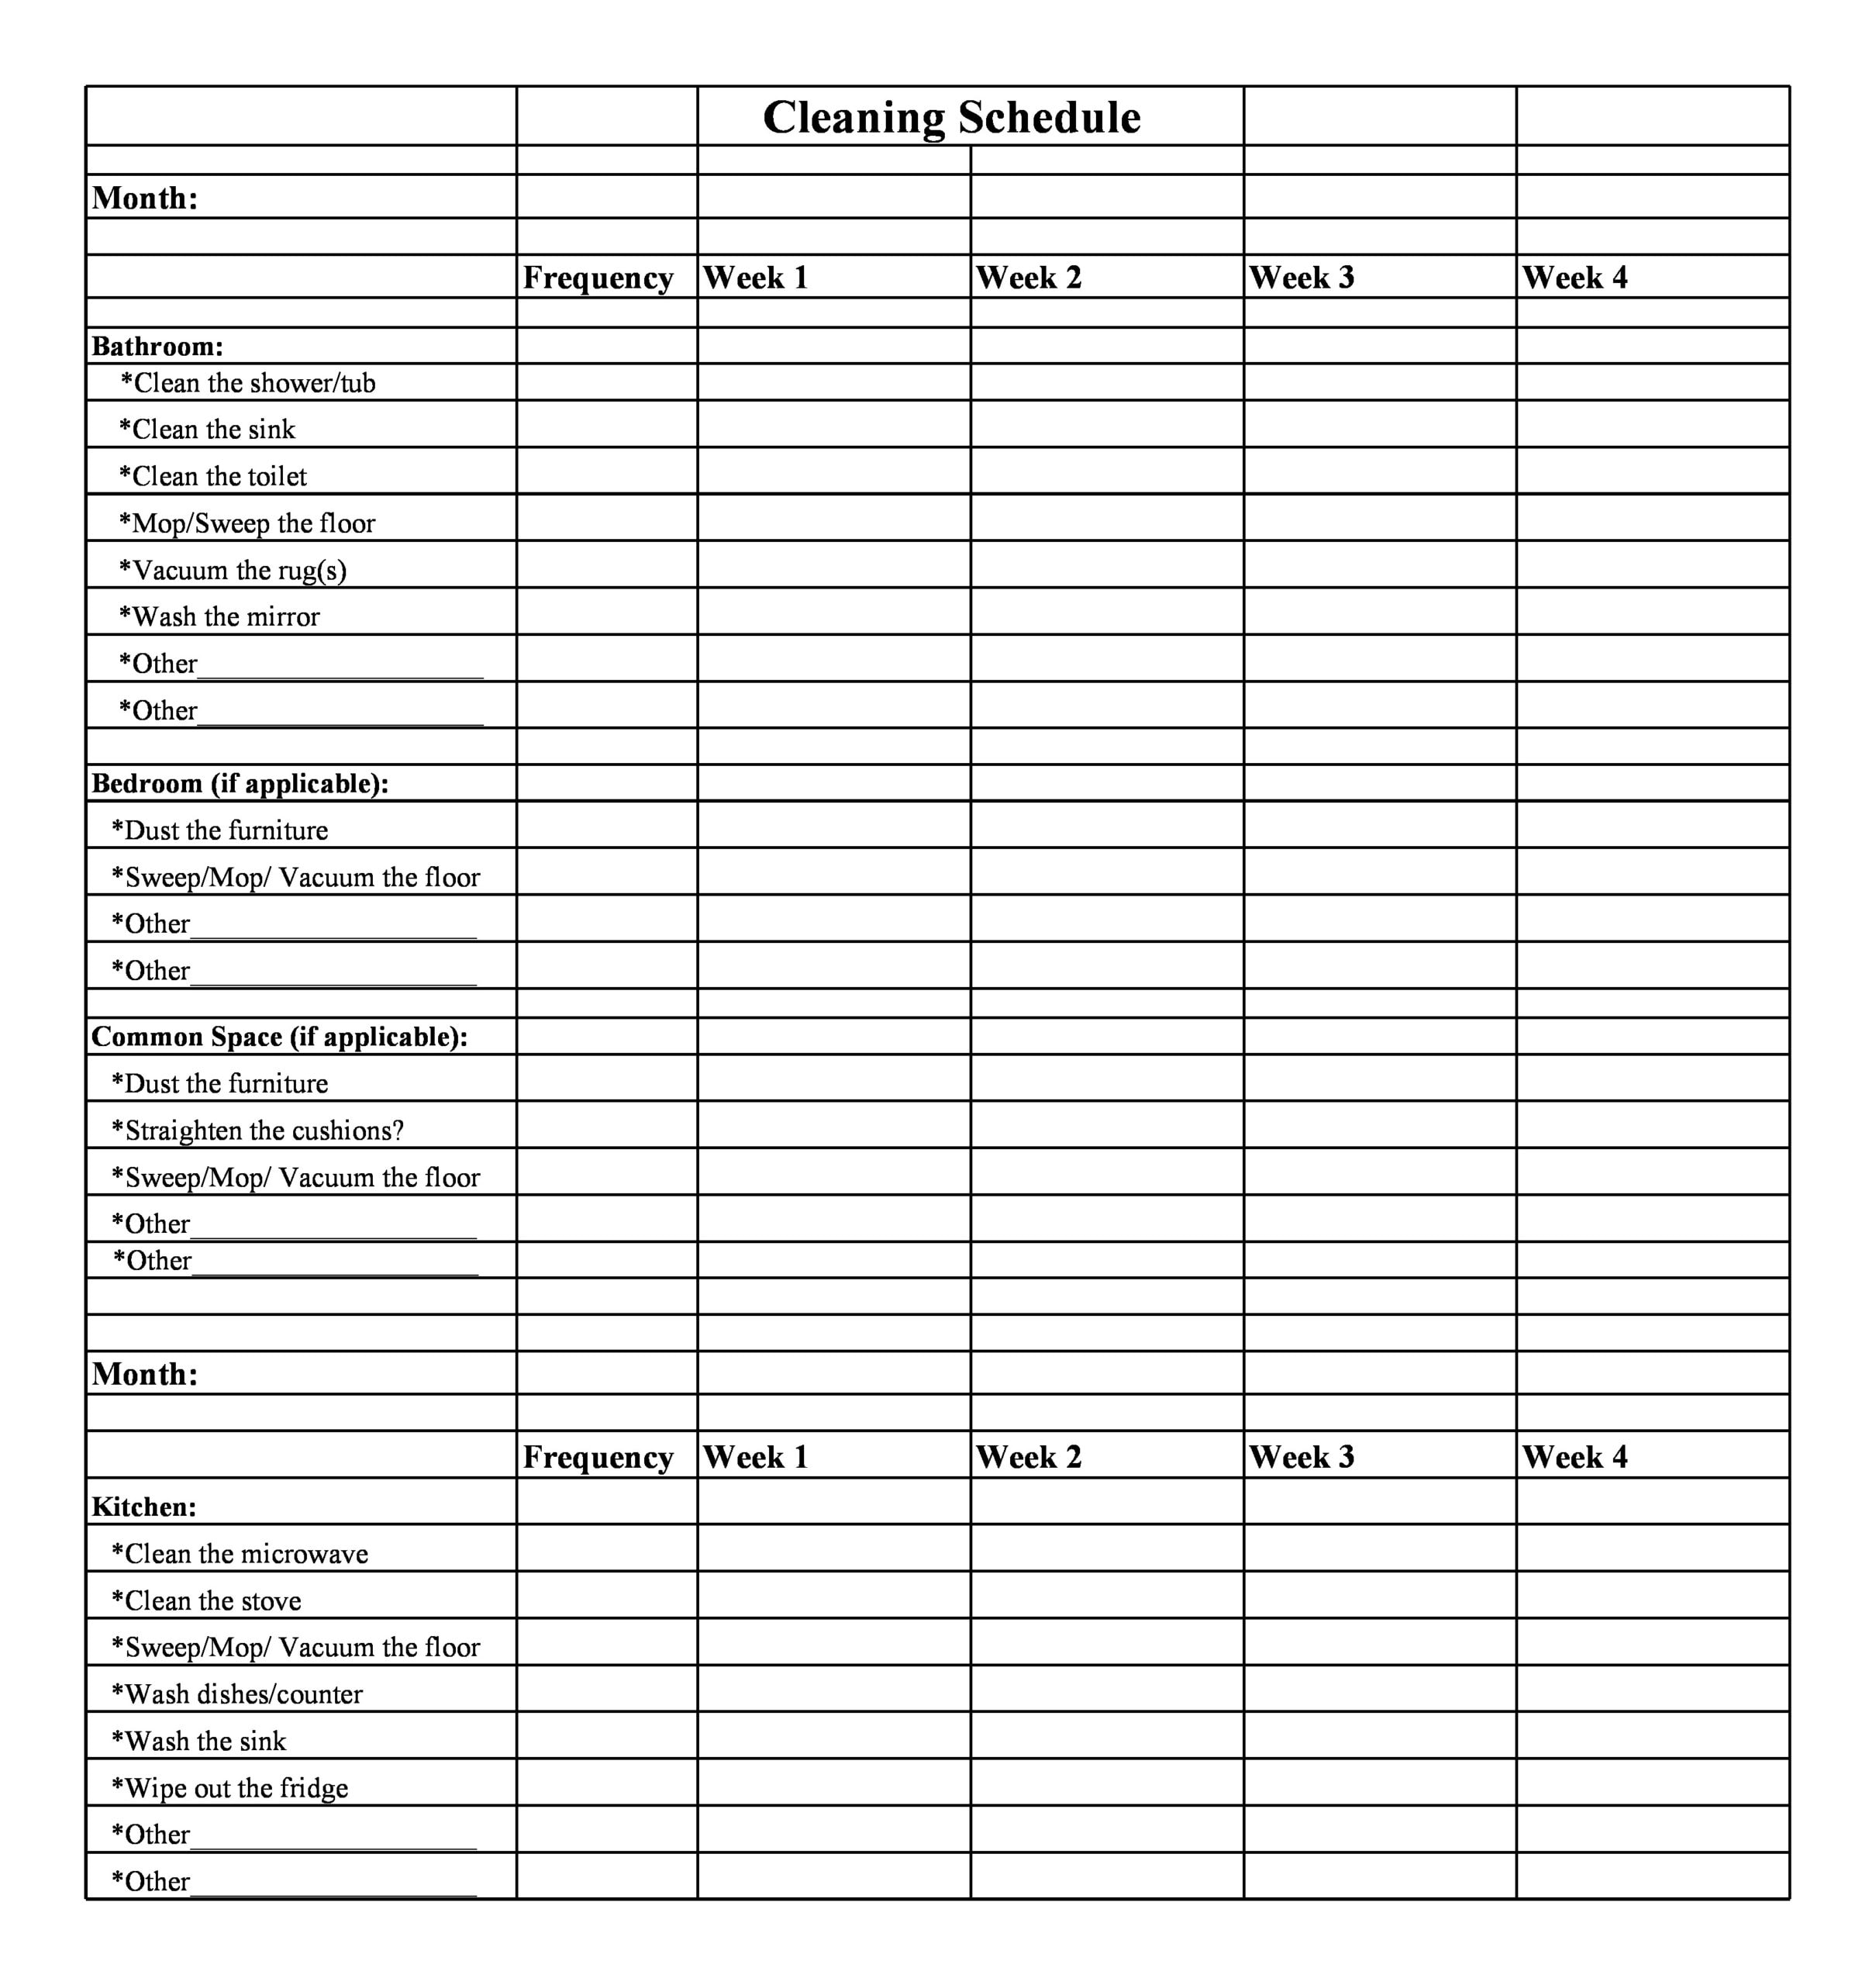 30-free-cleaning-schedule-templates-daily-weekly-monthly